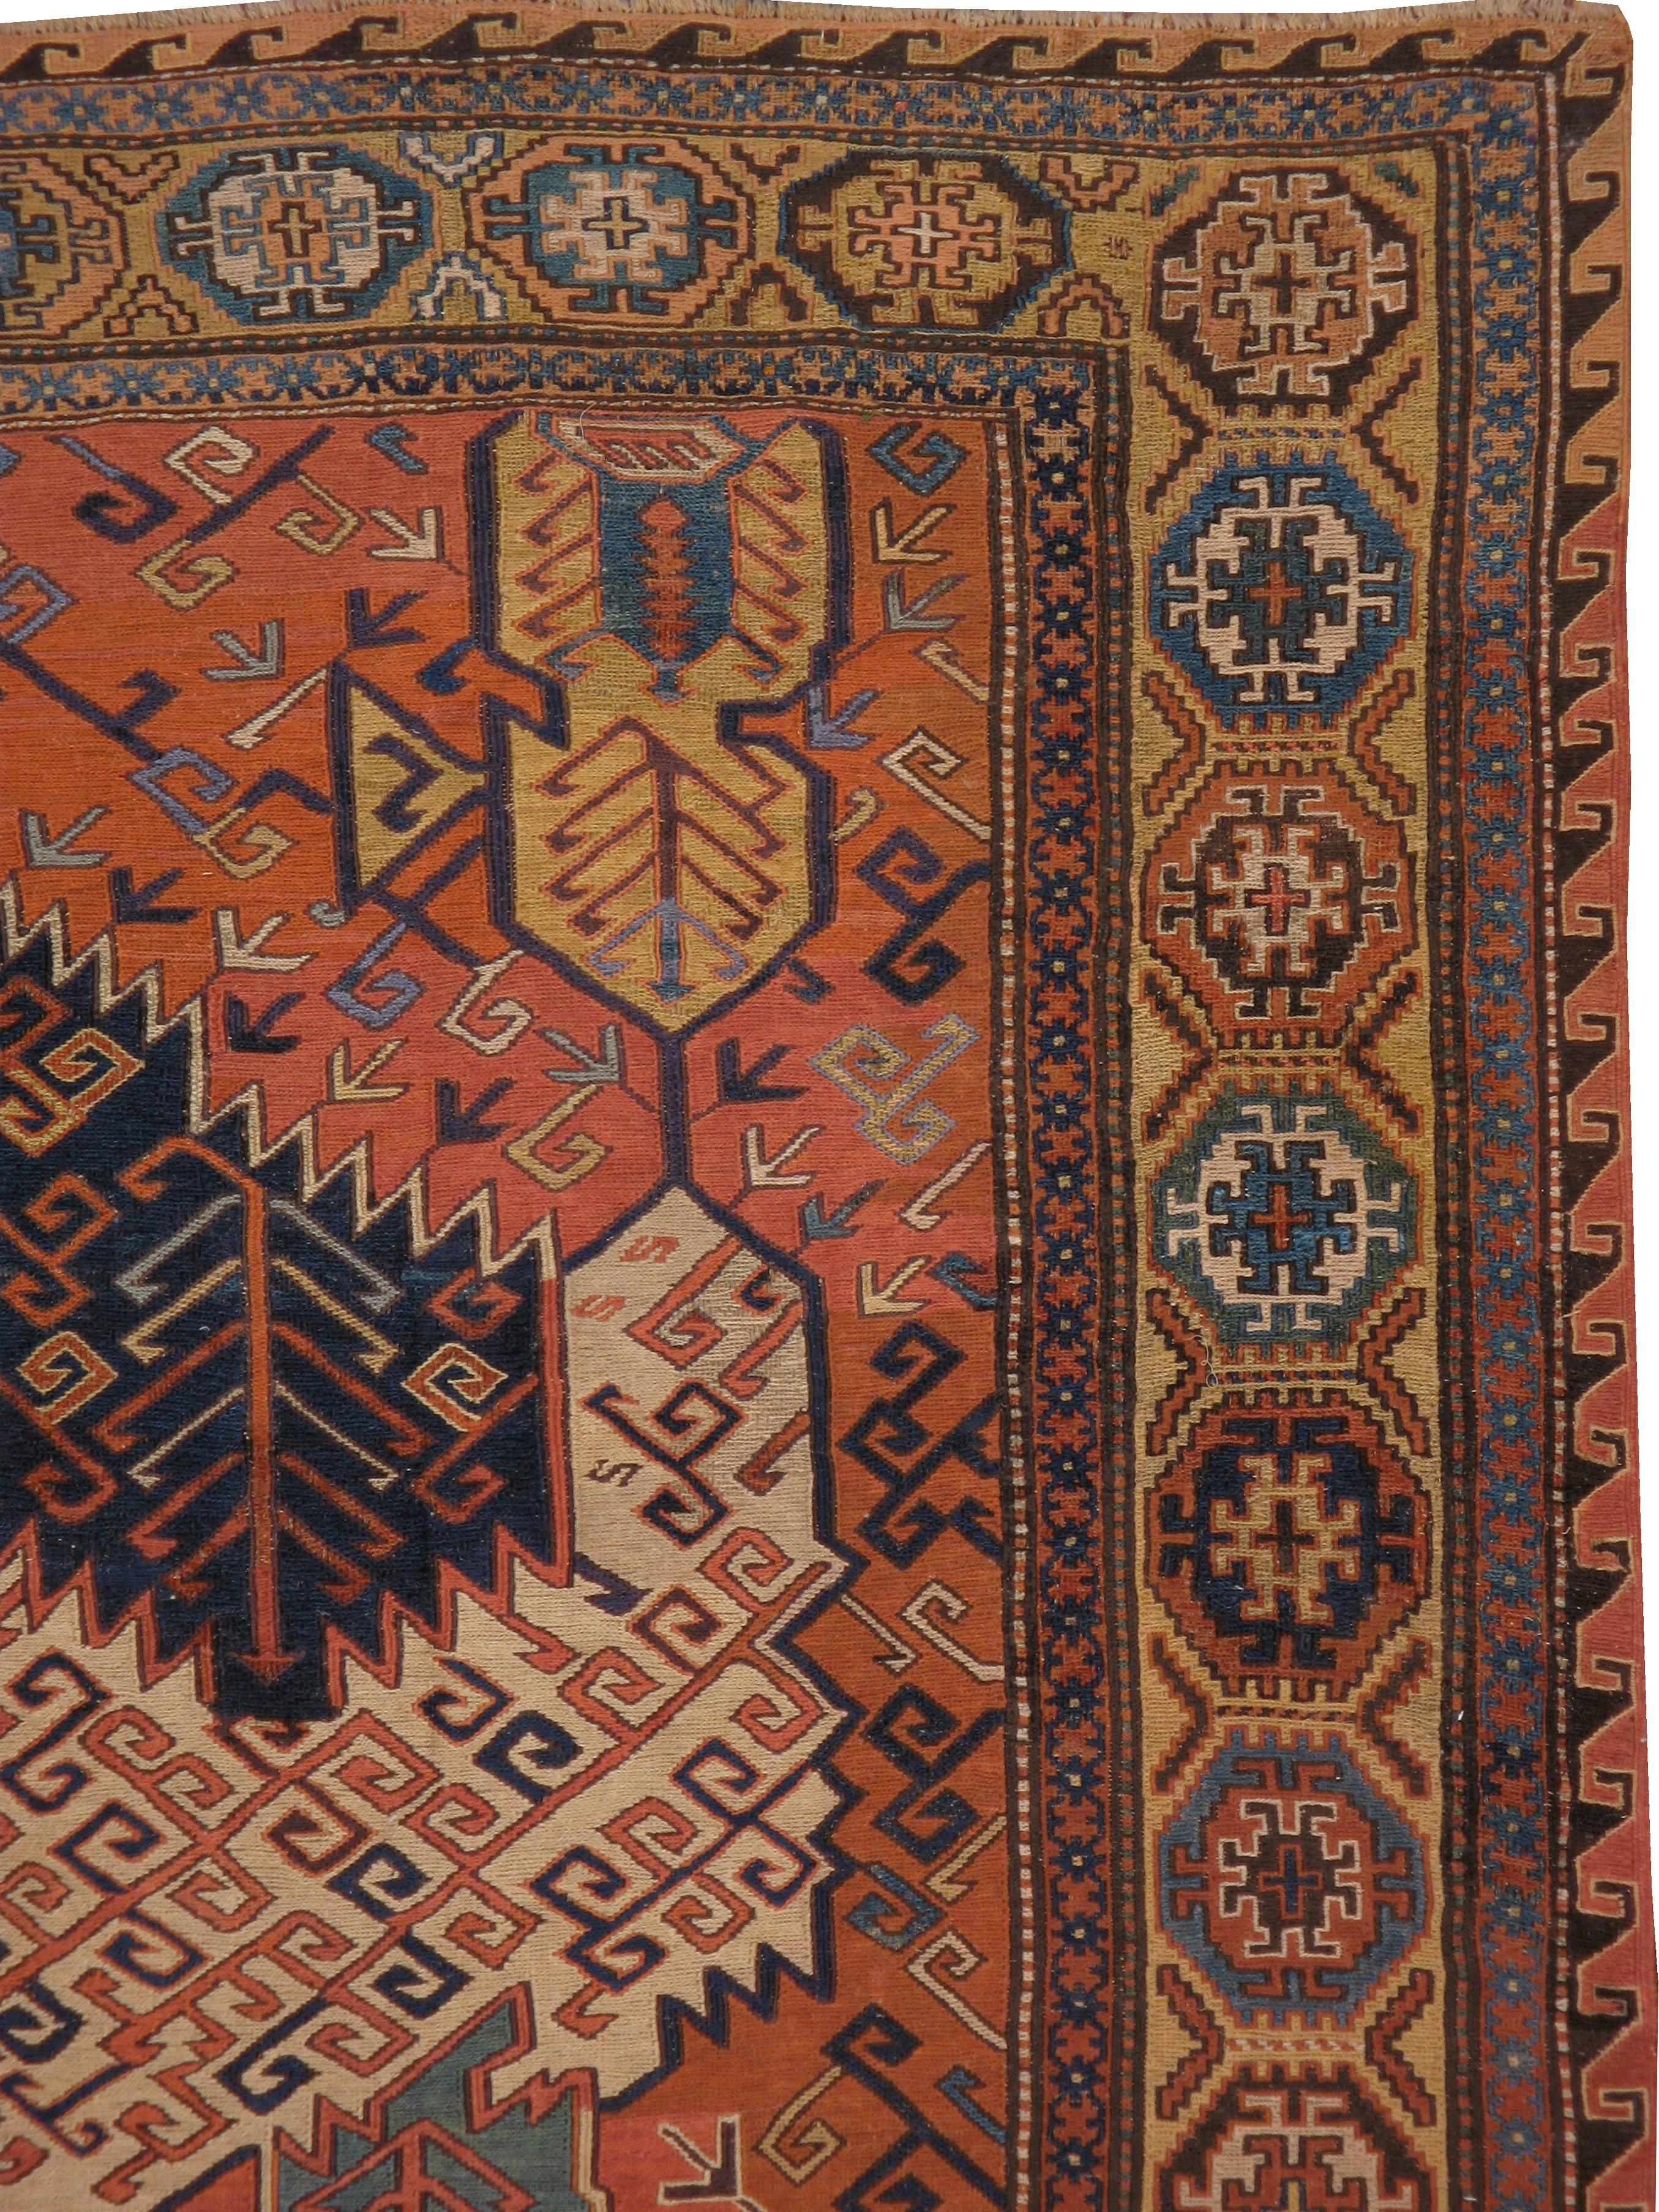 An antique Caucasian flat-woven Soumak carpet from the turn of the 20th century.